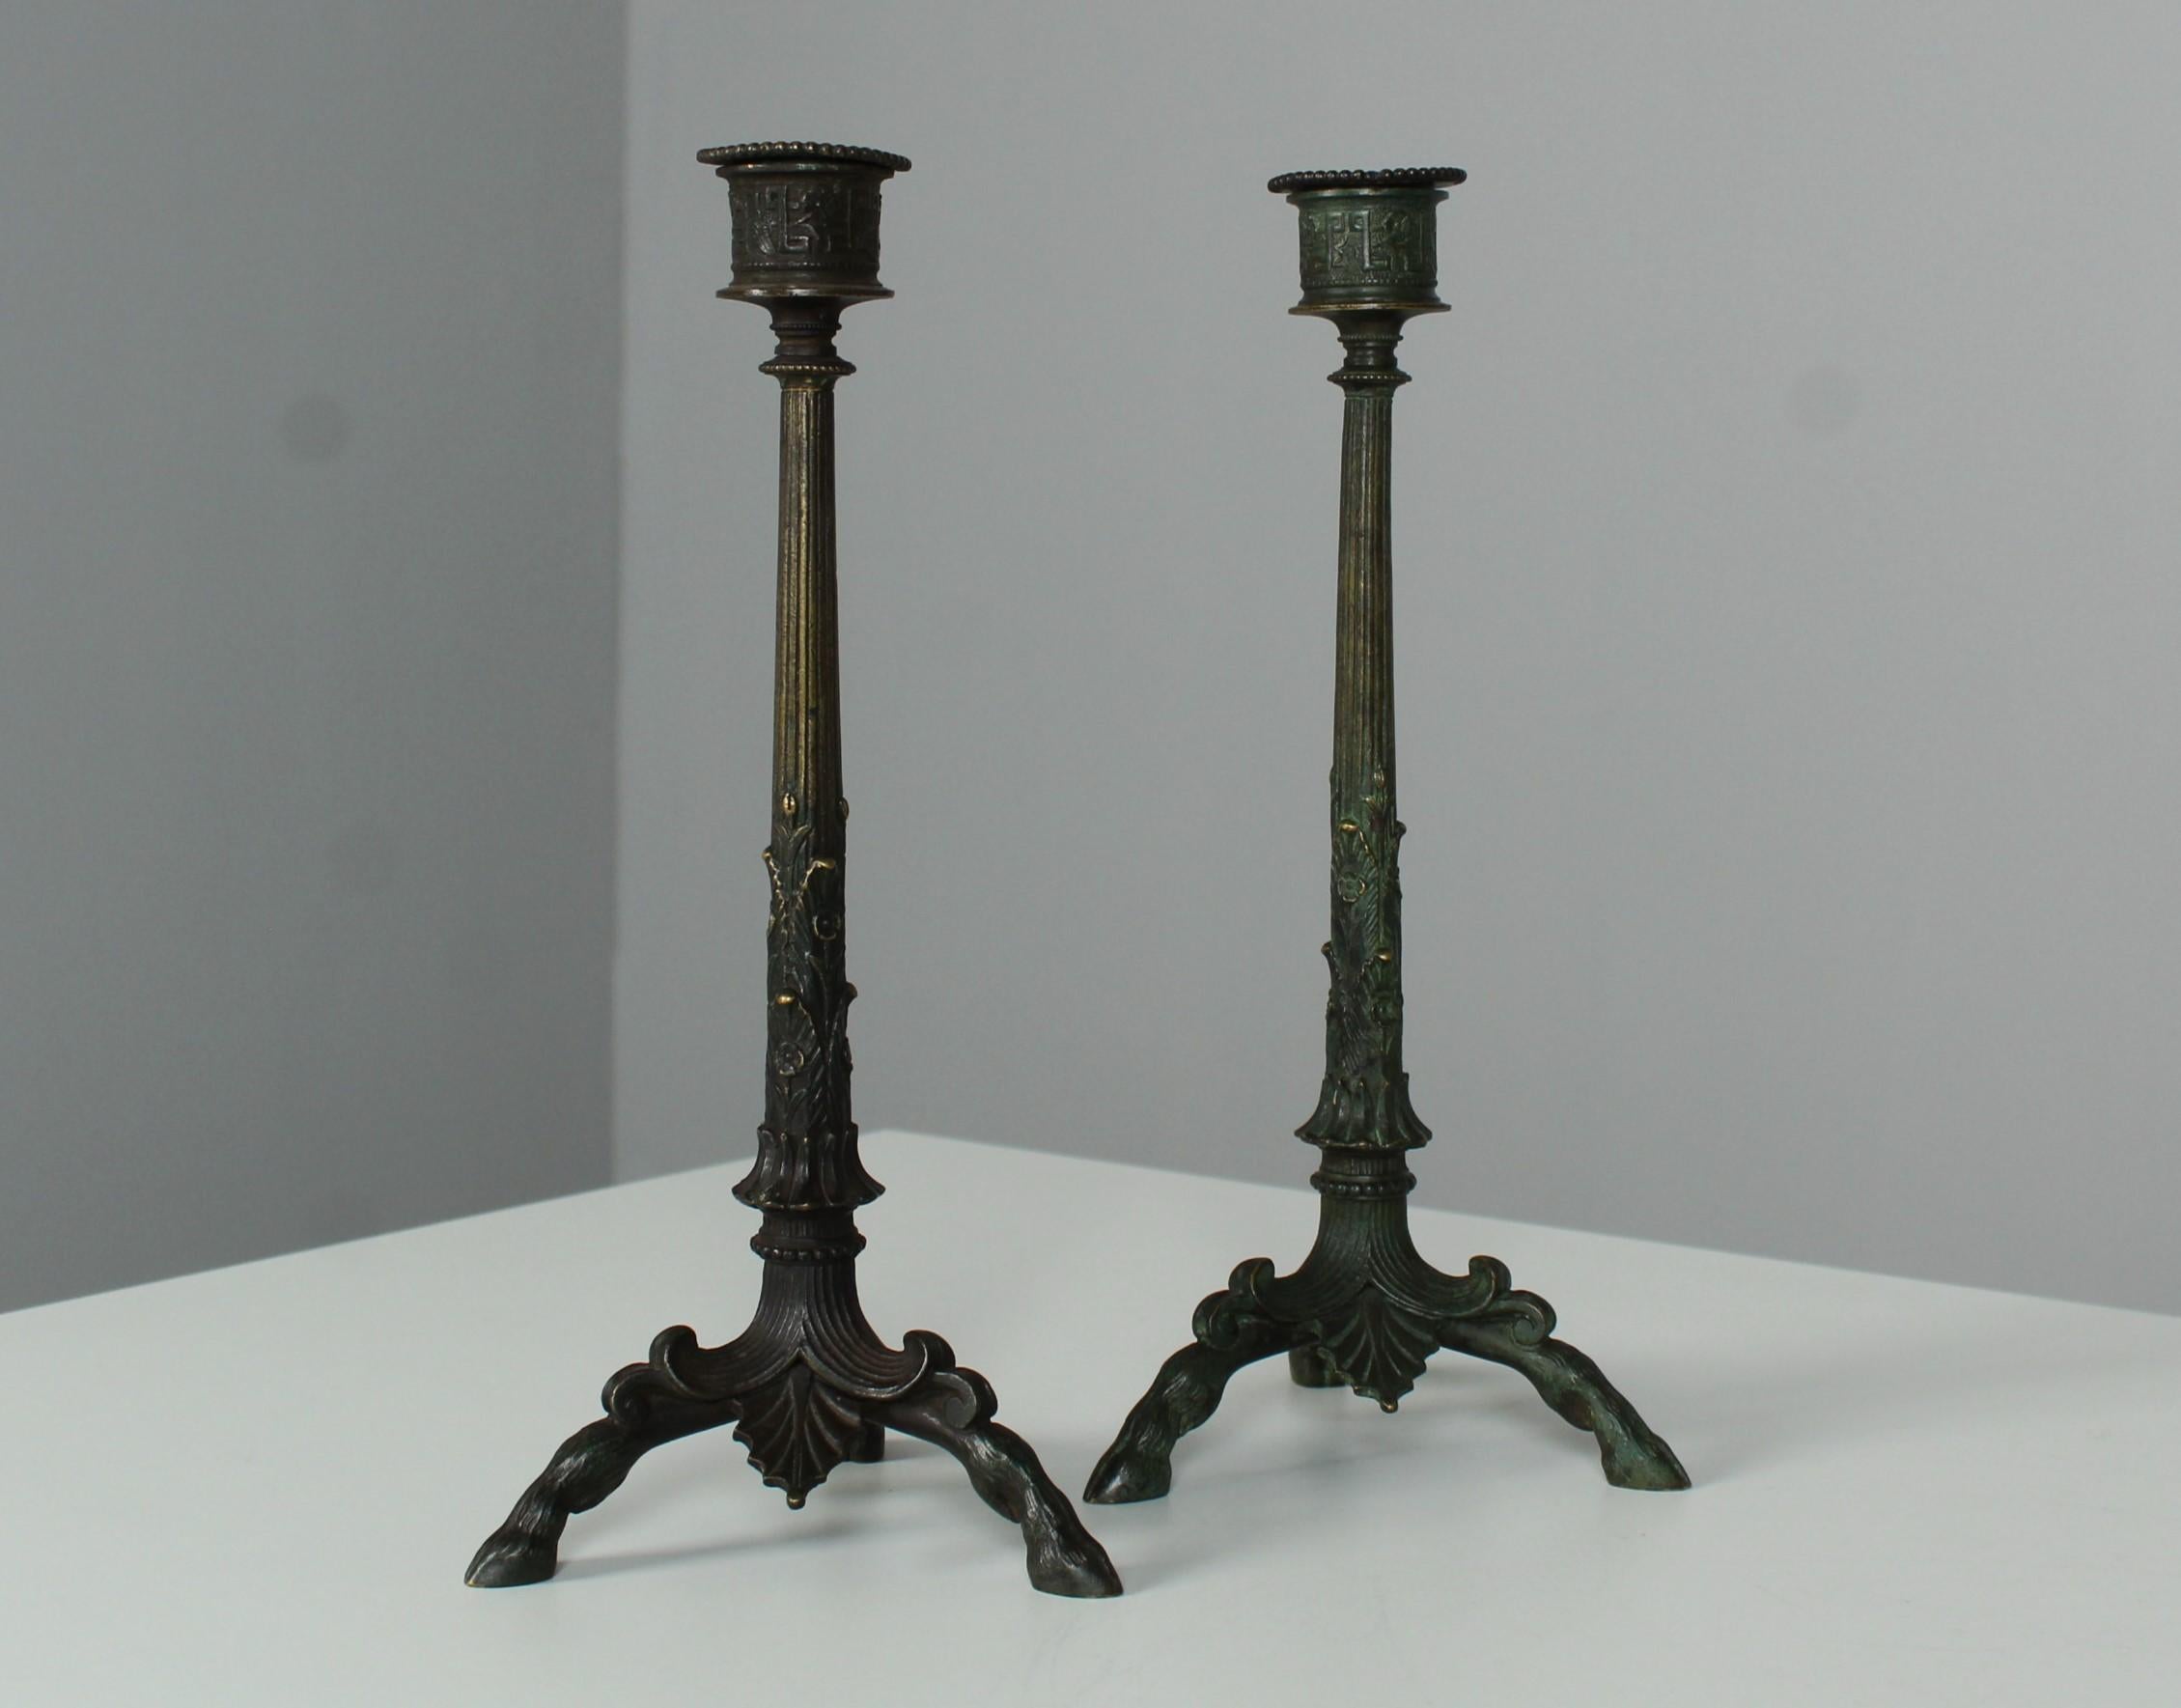 Beautiful pair of bronze candlesticks, France, late 19th century.
Wonderful ornaments and three feet depicting deer hooves.
Patinated bronze.